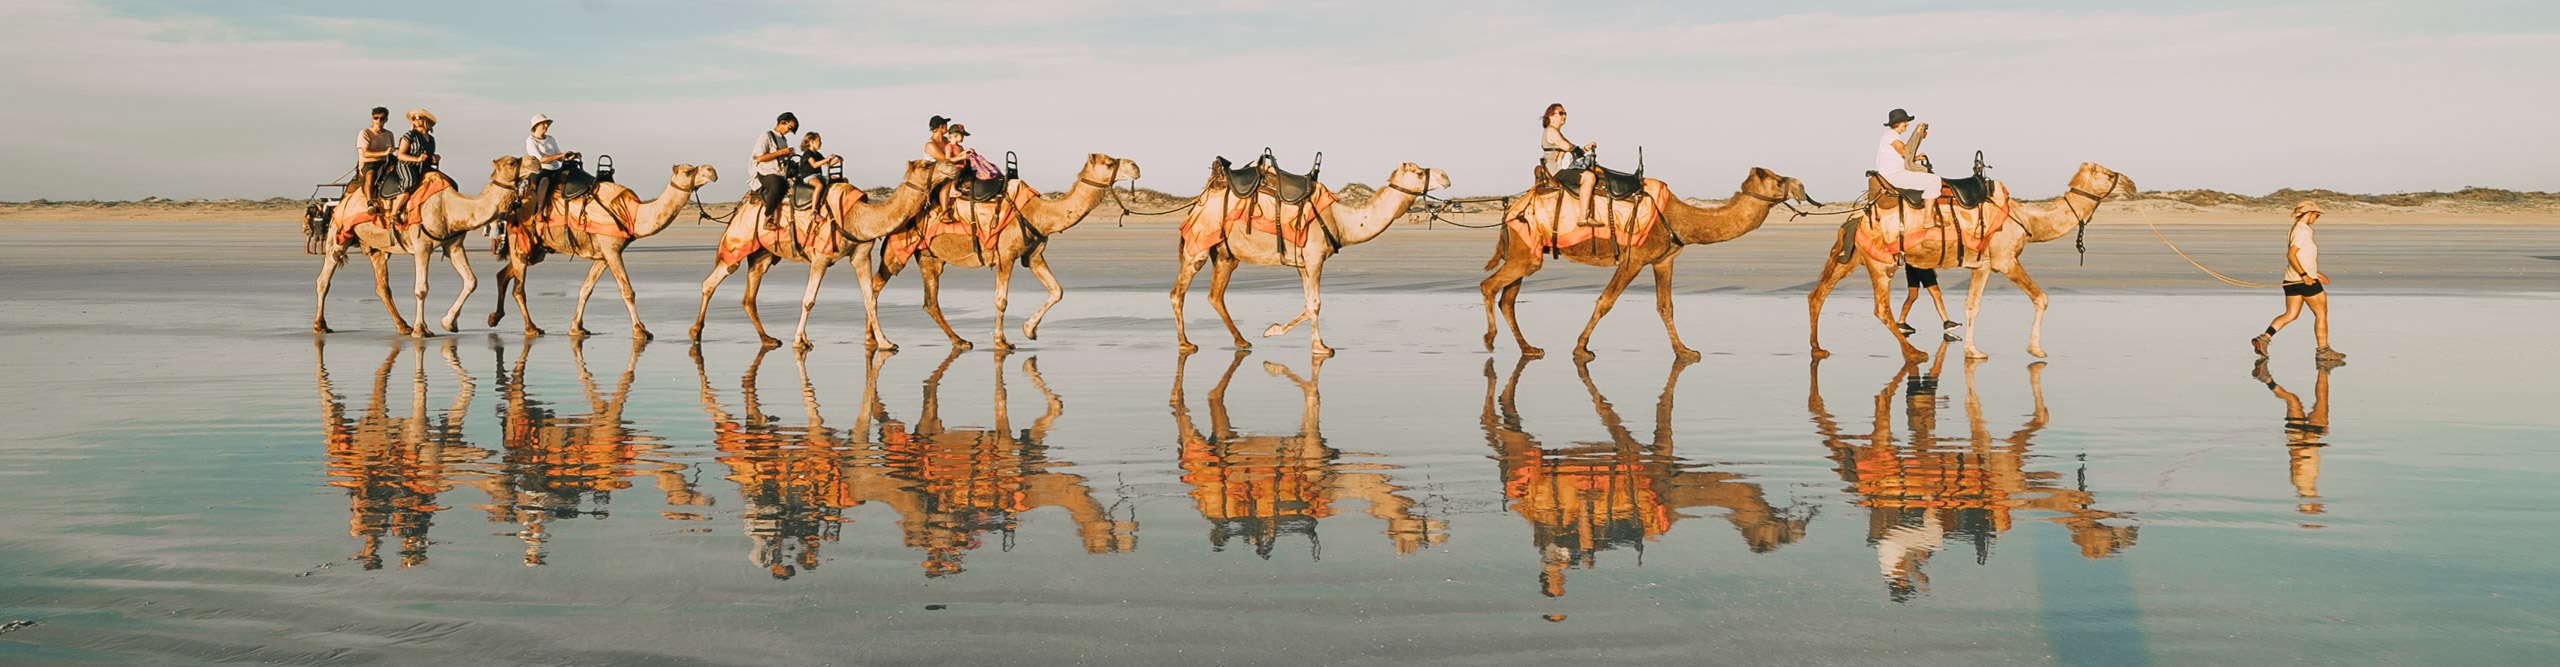 Group on camels reflected in the wet sand riding across the beach in Broome, Western Australia